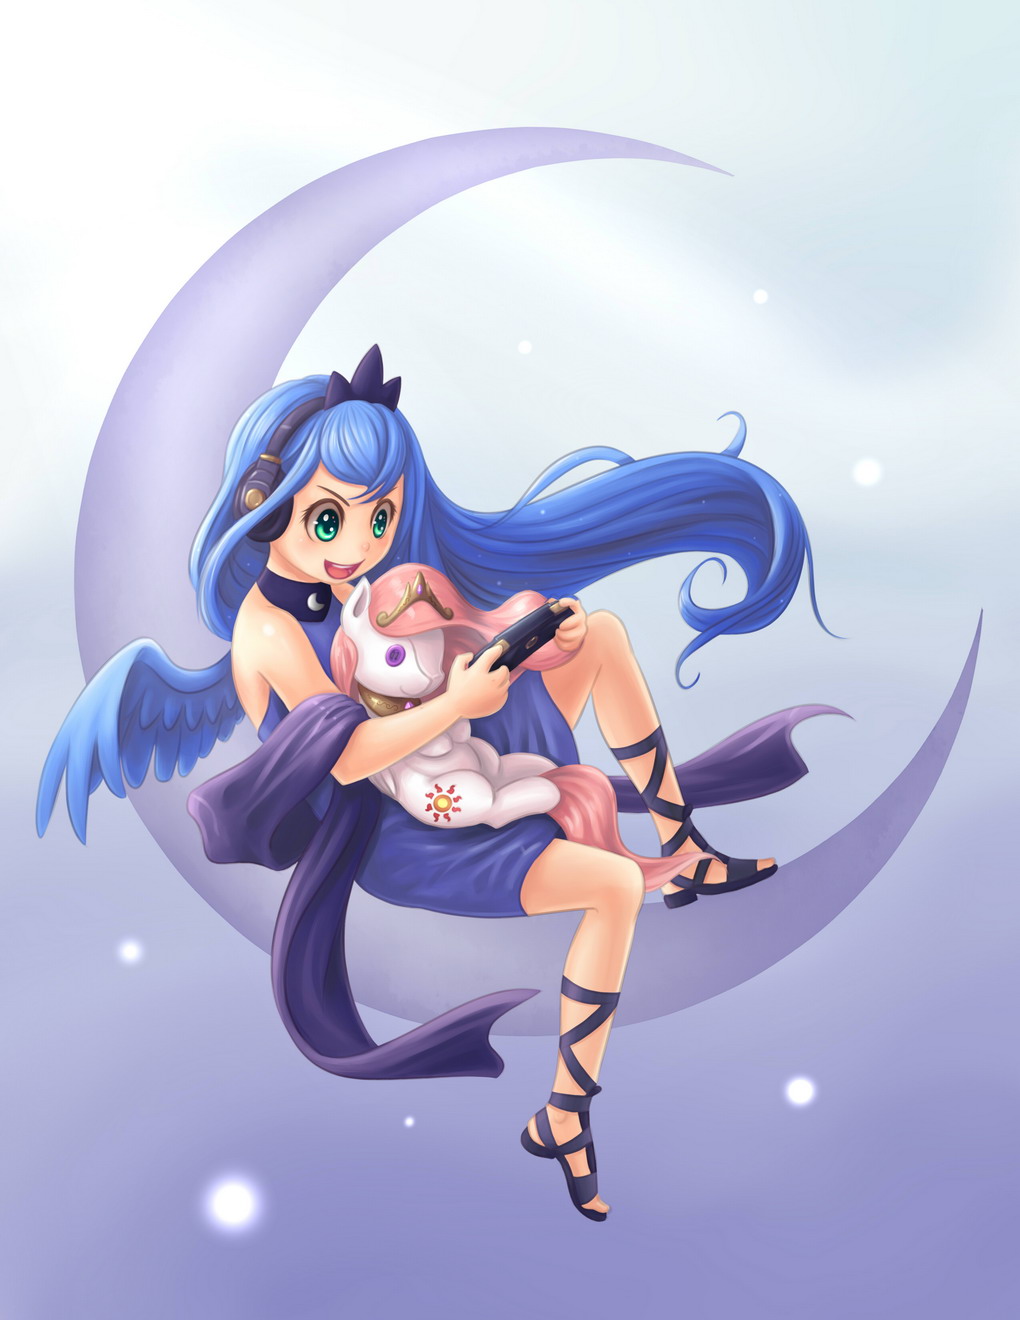 1girl bare_shoulders blue_hair celestia_(my_little_pony) character_doll crescent dress green_eyes headphones highres long_hair luna_(my_little_pony) my_little_pony my_little_pony_friendship_is_magic objectification open_mouth personification sandals shoes smile solo tiara wings